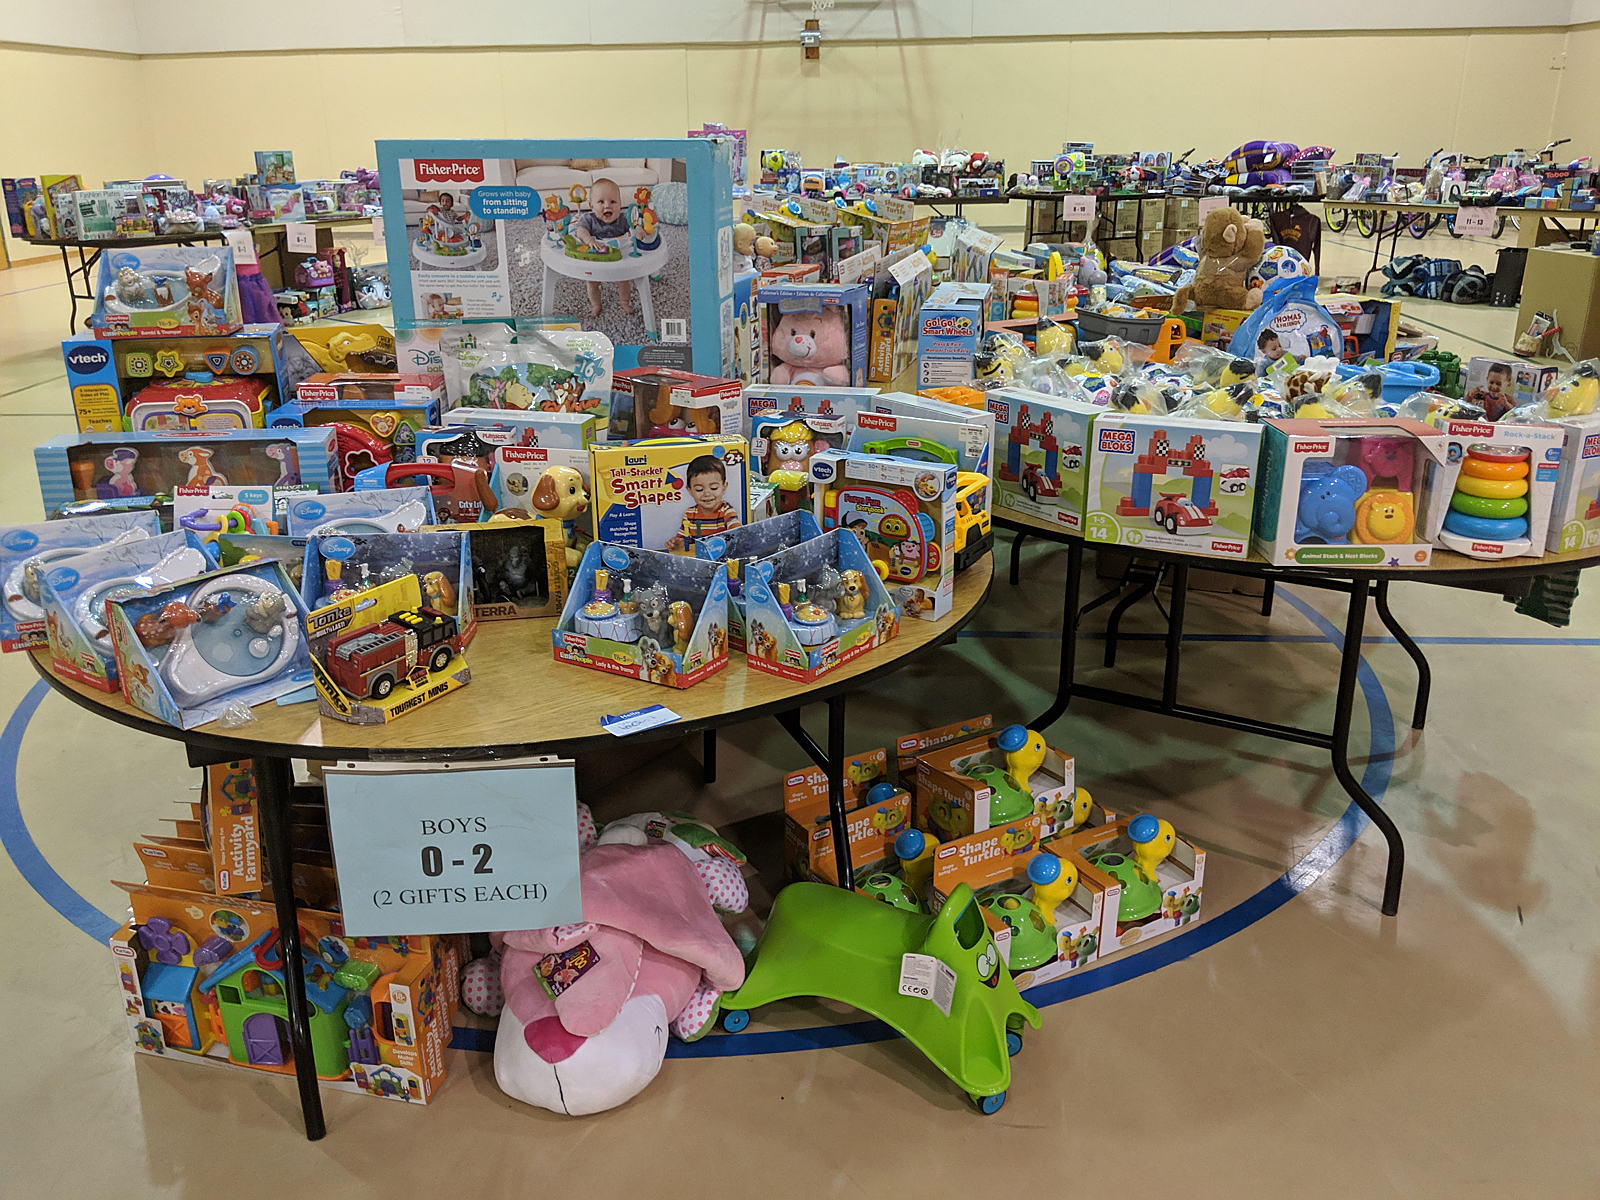 Hope Mn Toys For Tots Teens Givemn